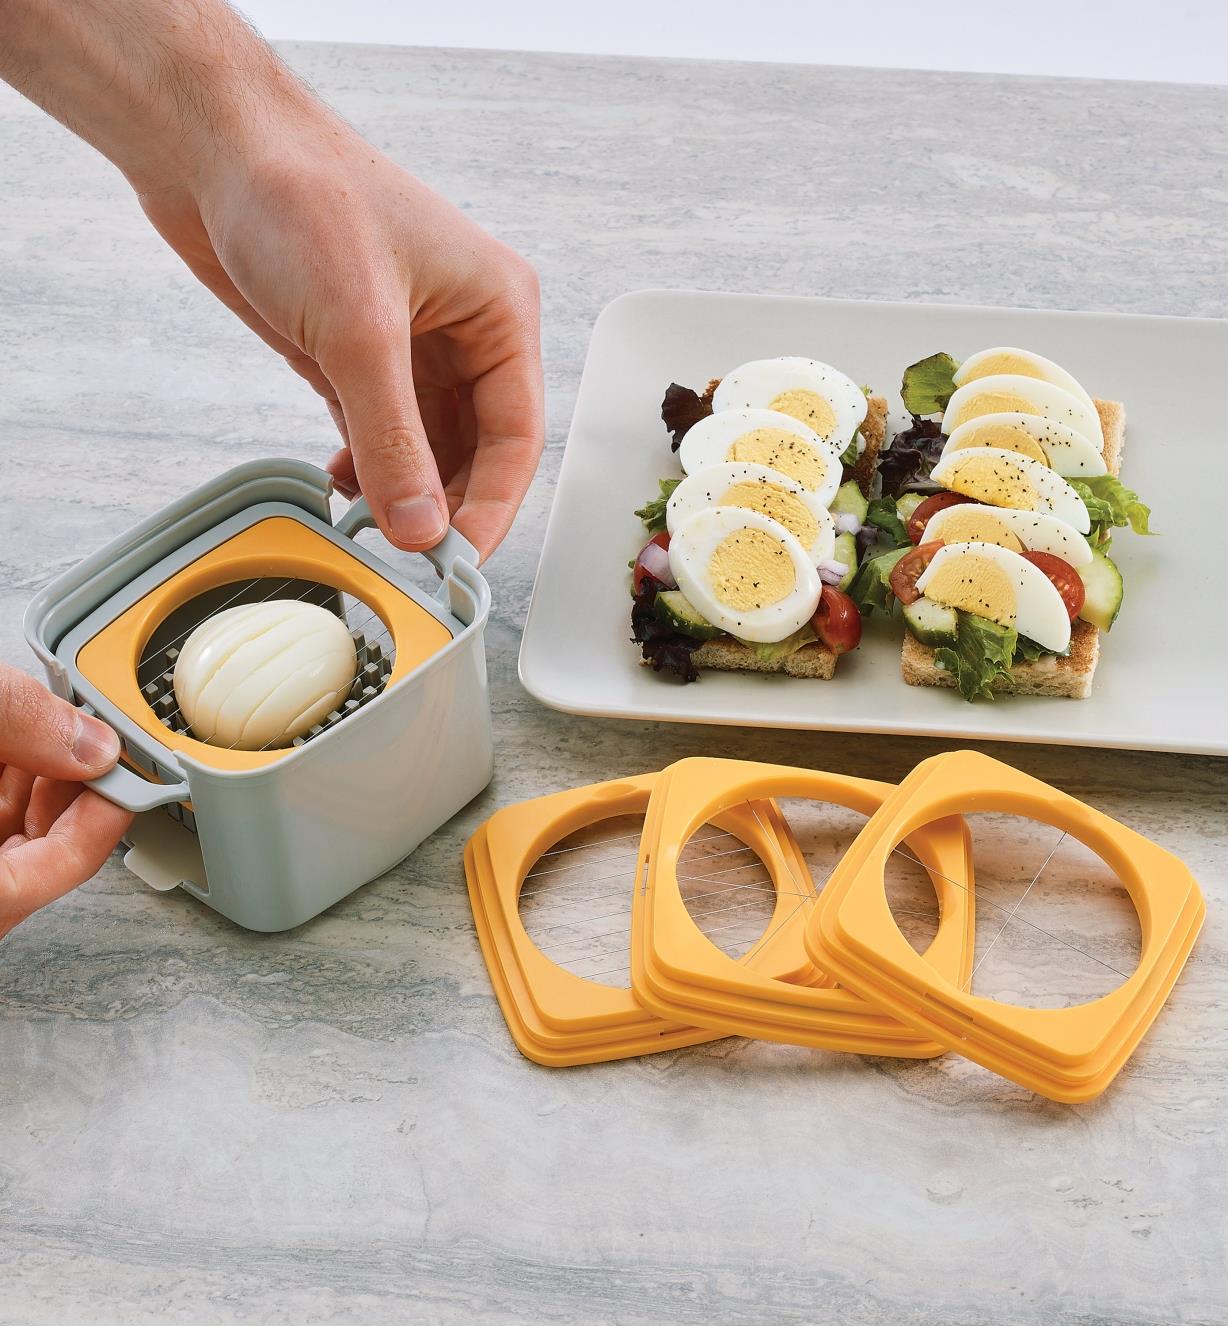 Slicing an egg with the Egg Cutter, with a appetizer made with sliced eggs nearby